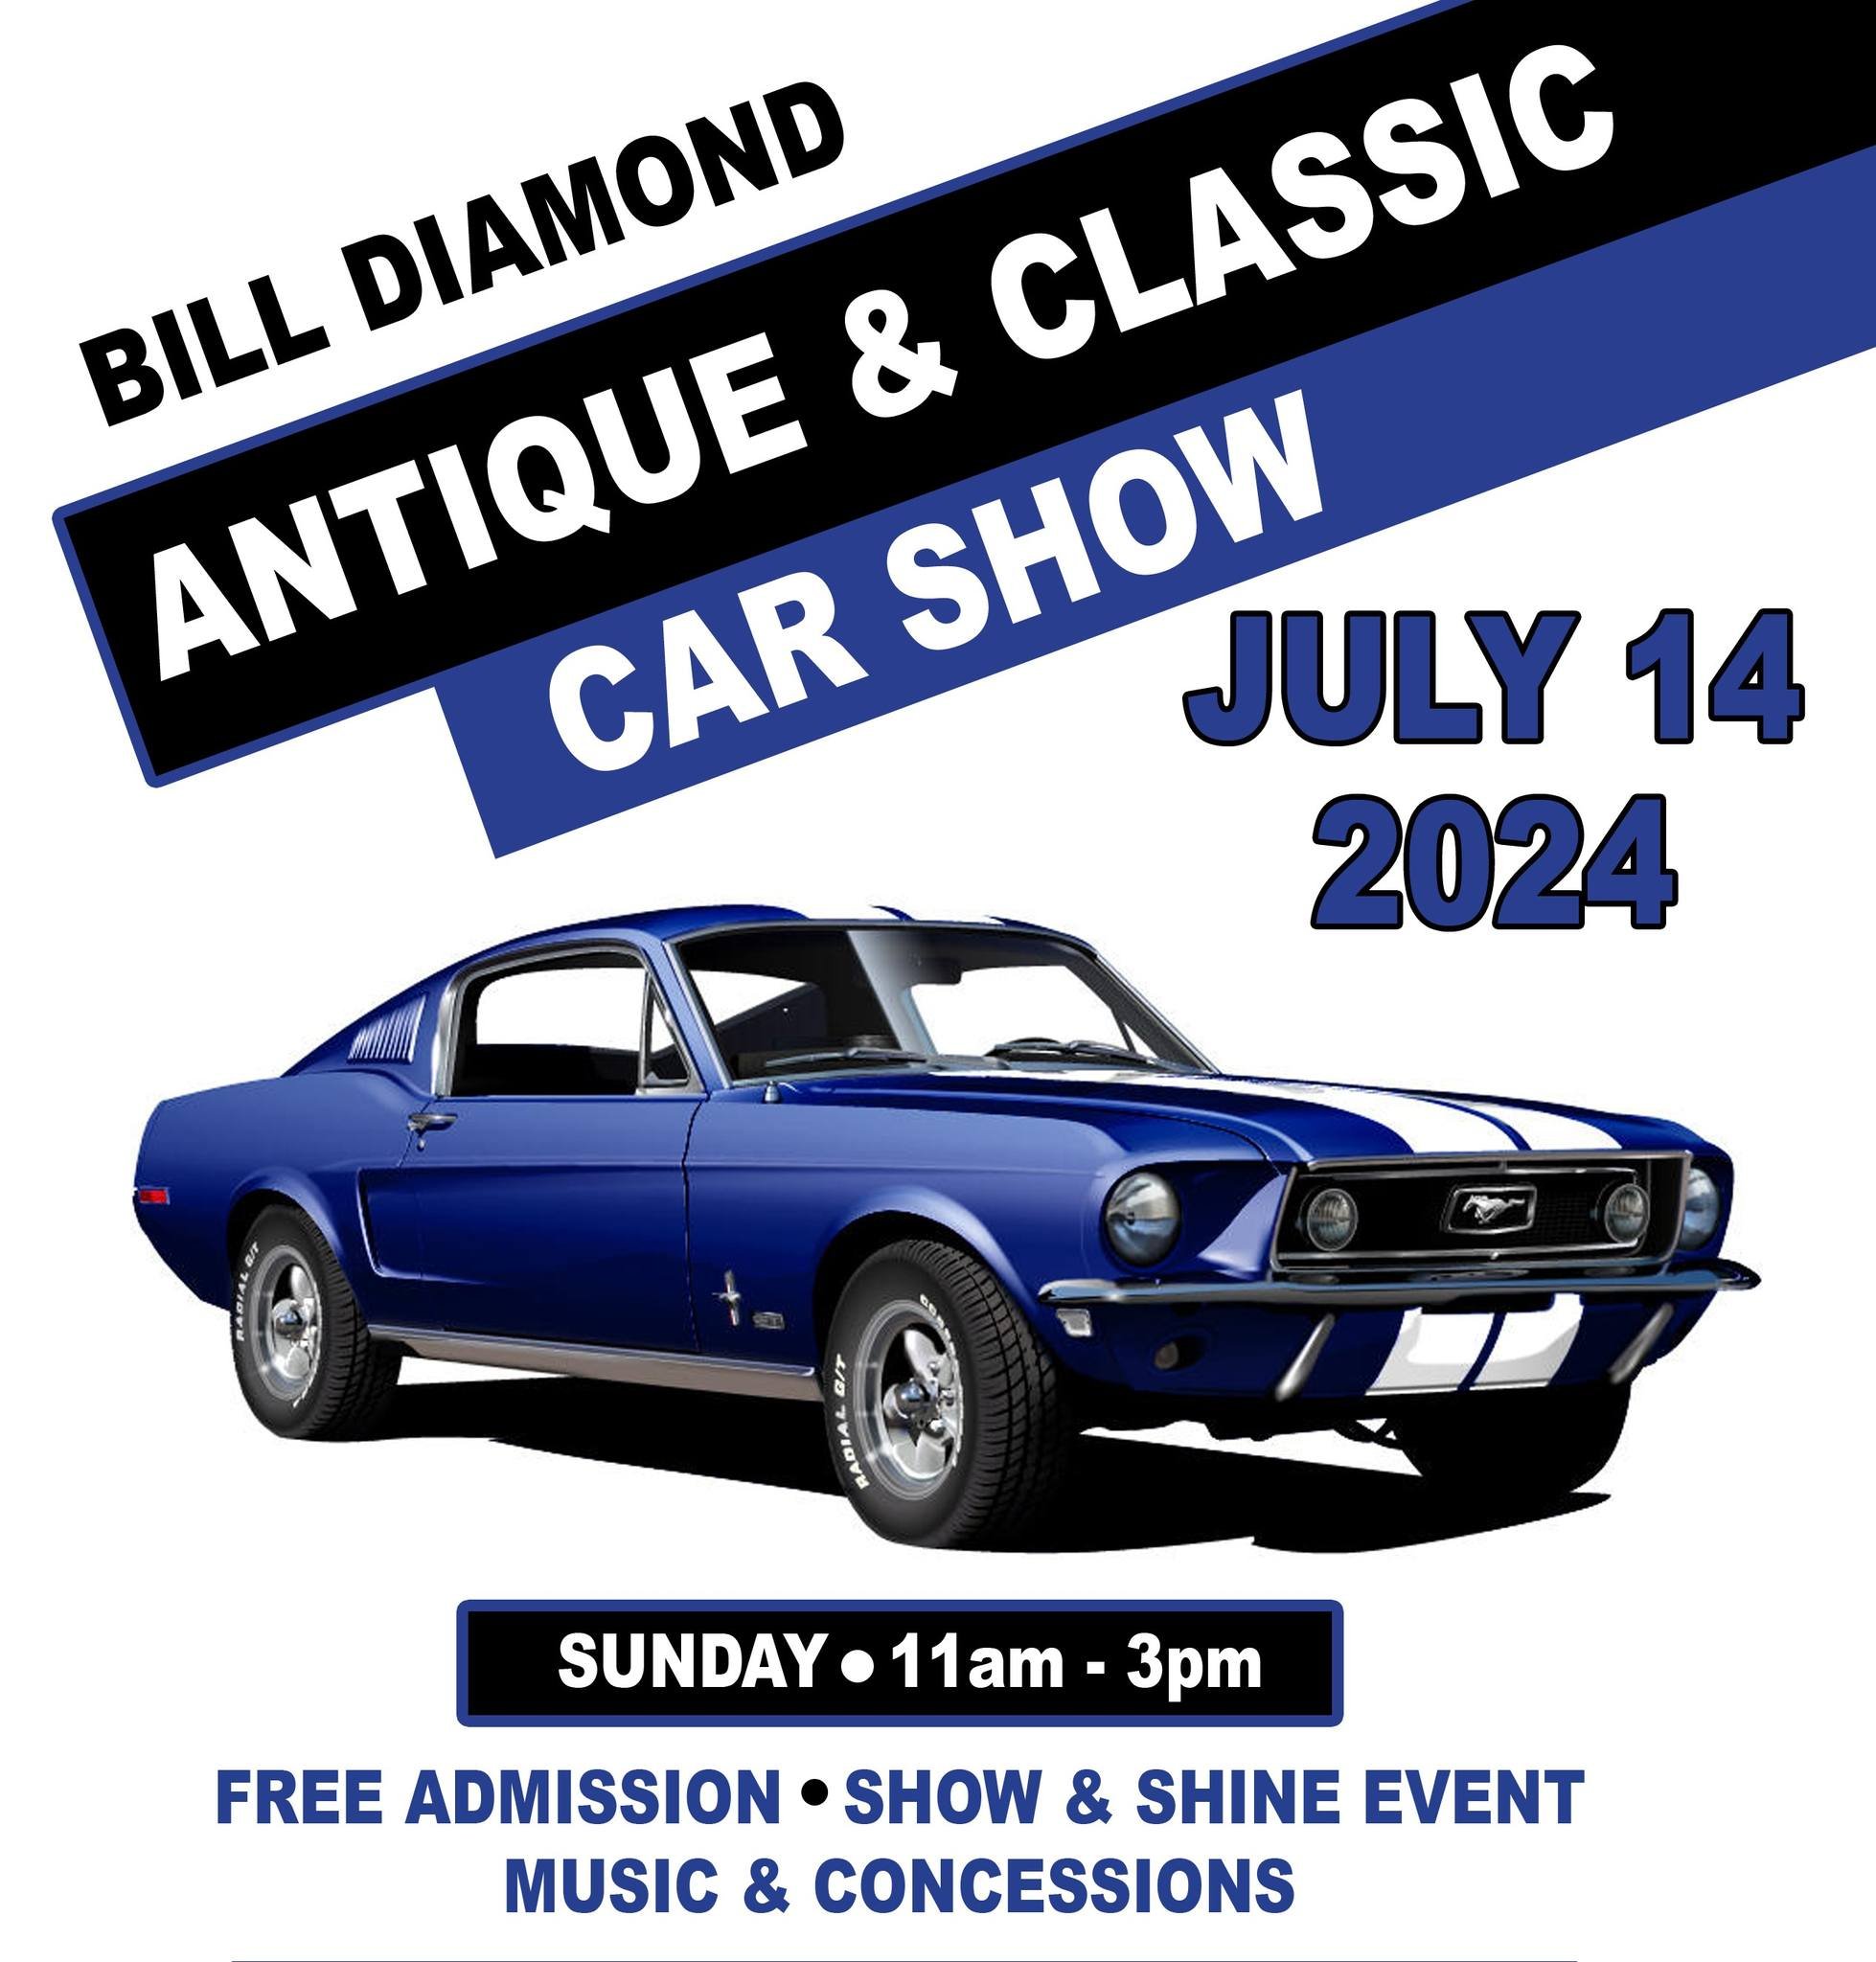 📢Just two months until the Bill Diamond Antique &amp; Classic Car Show on the riverfront!

Last year was the biggest car show in its 50-year history. Details of this annual Sergeant Floyd River Museum &amp; Welcome Center event are available at Siou